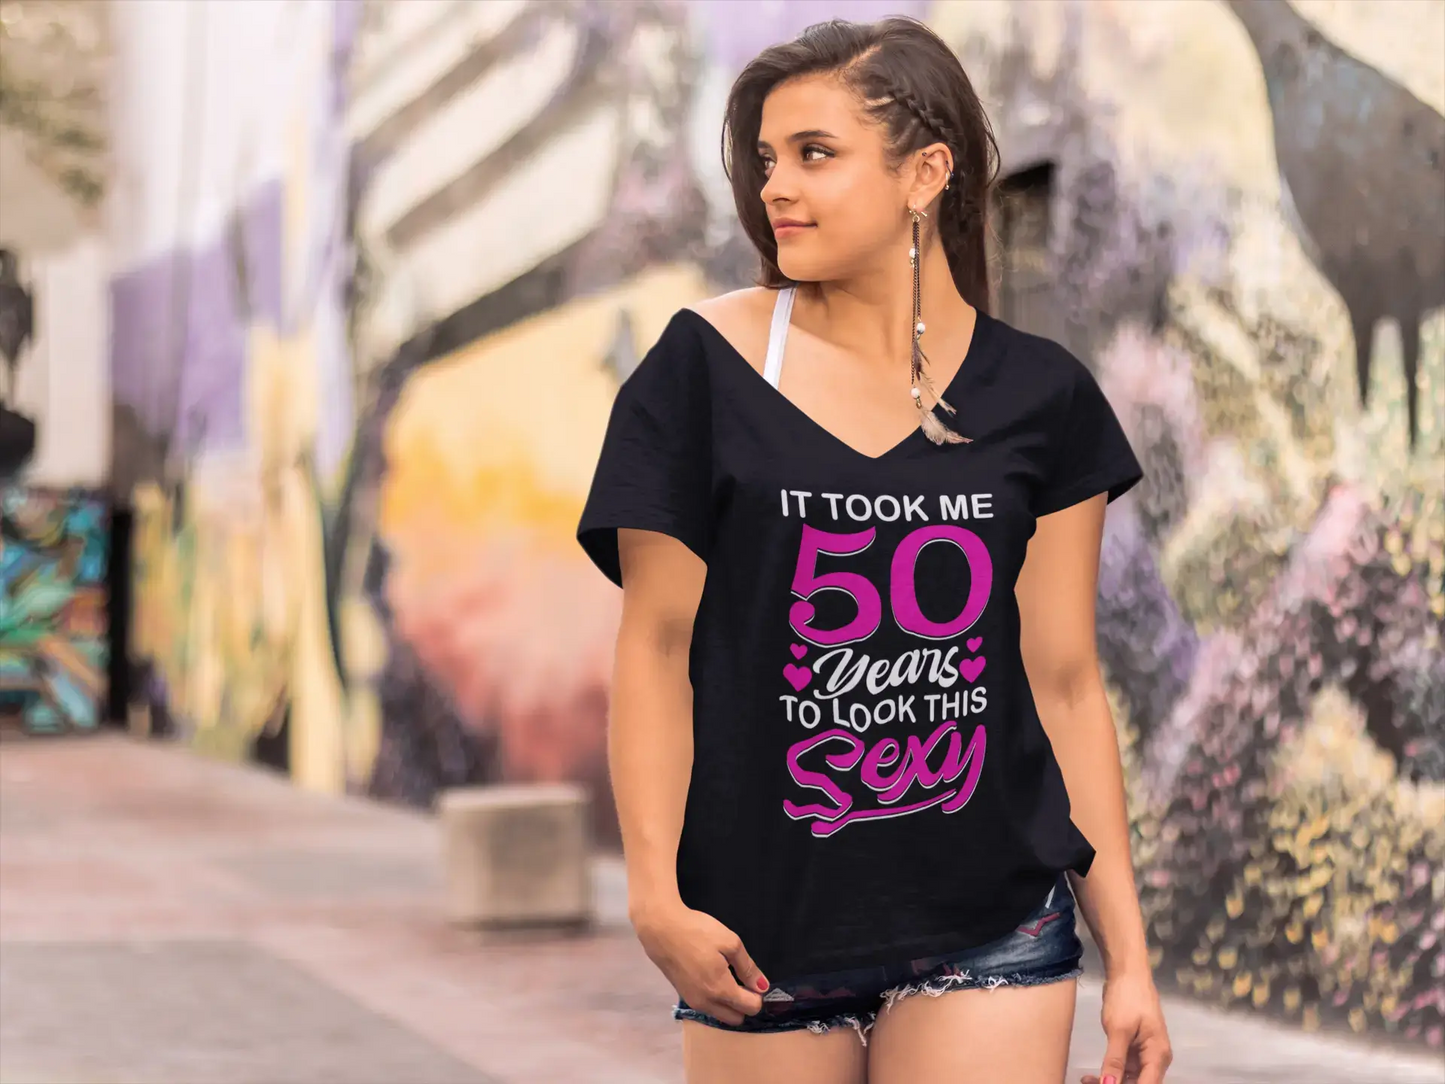 ULTRABASIC Women's T-Shirt It Took Me 50 Years to Look This Sexy - 50th Birthday Shirt for Ladies